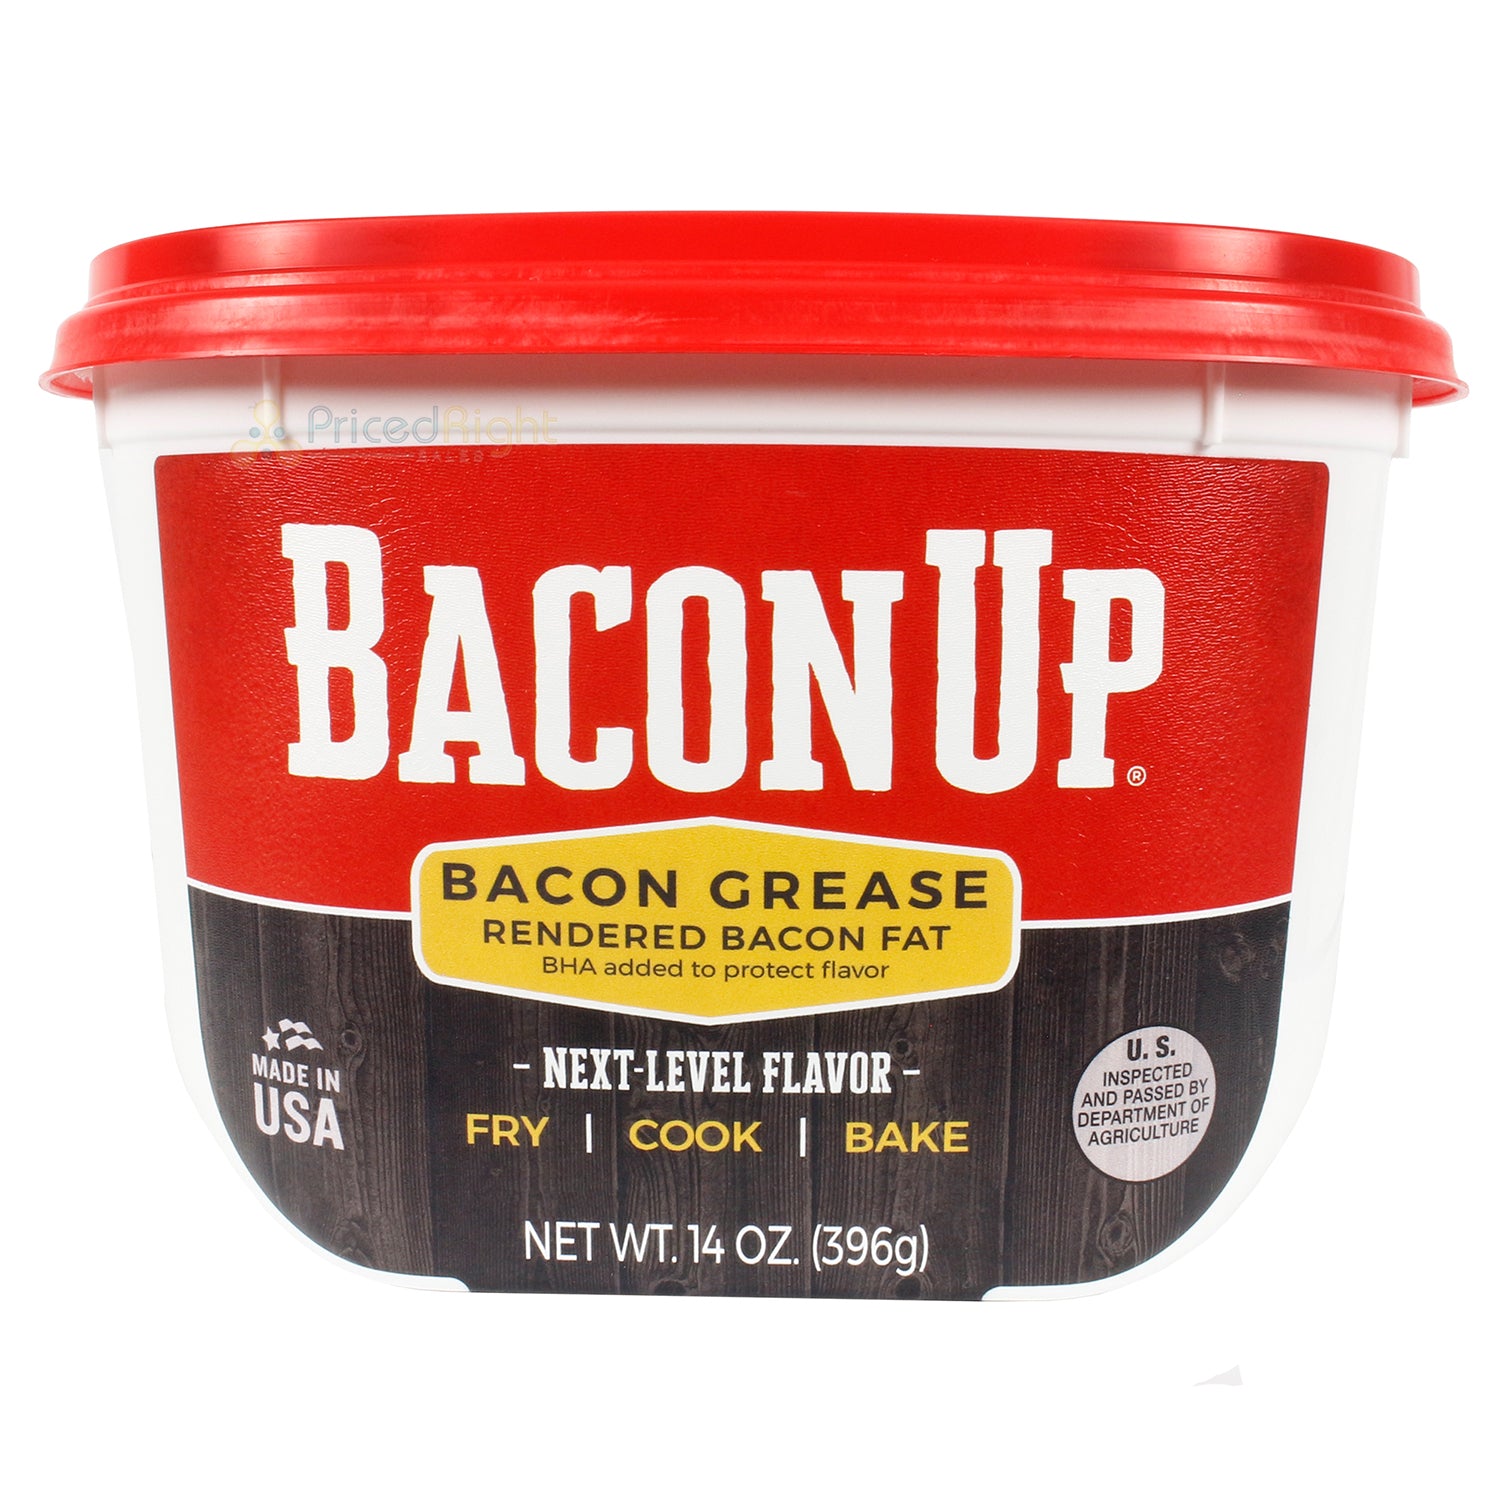 Departments - BACON UP 14OZ PURE BACON GREASE